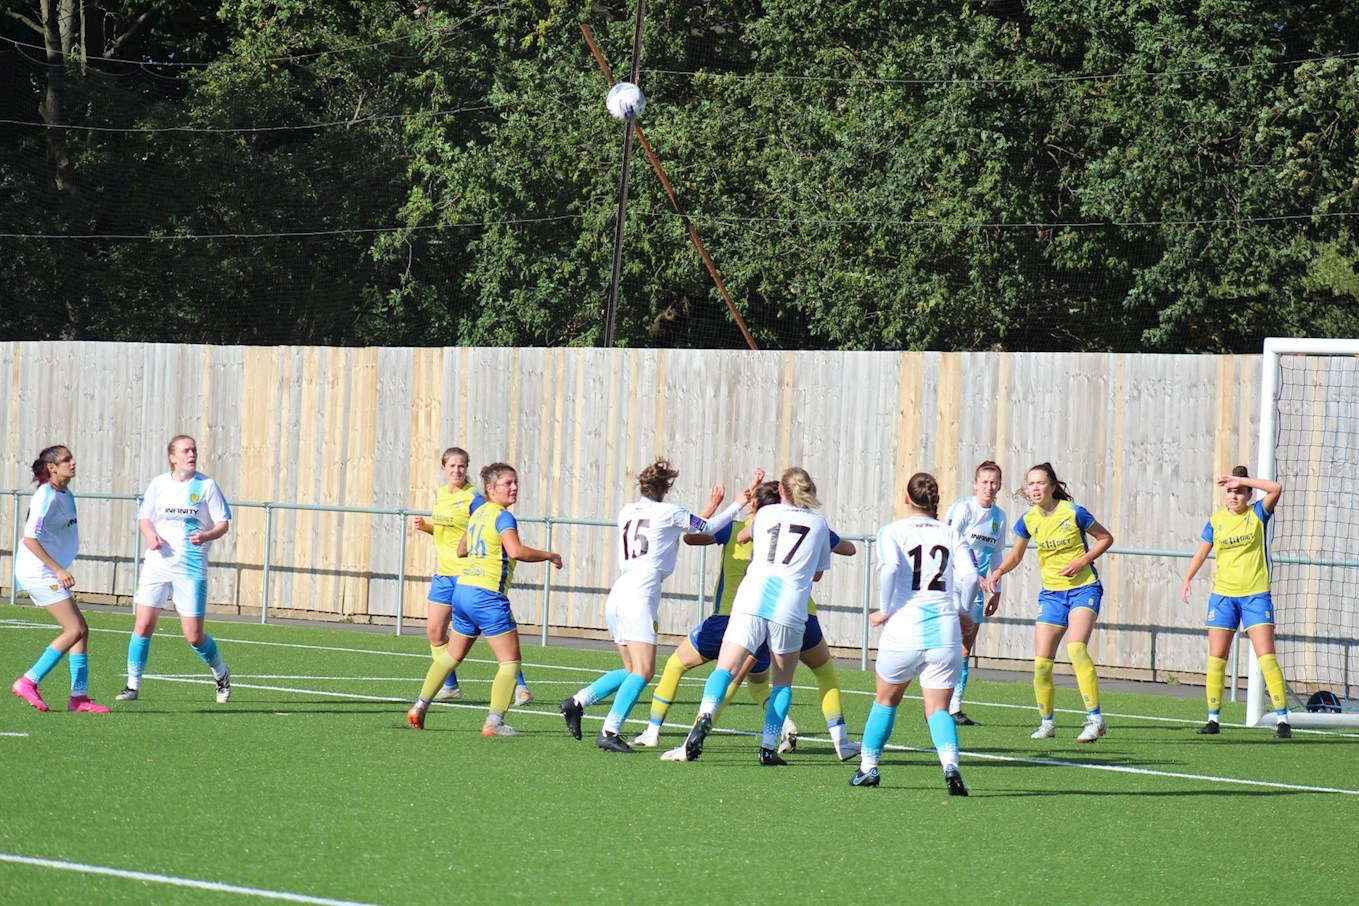 BURTON Albion taking on Solihull Moors in FAWNL action